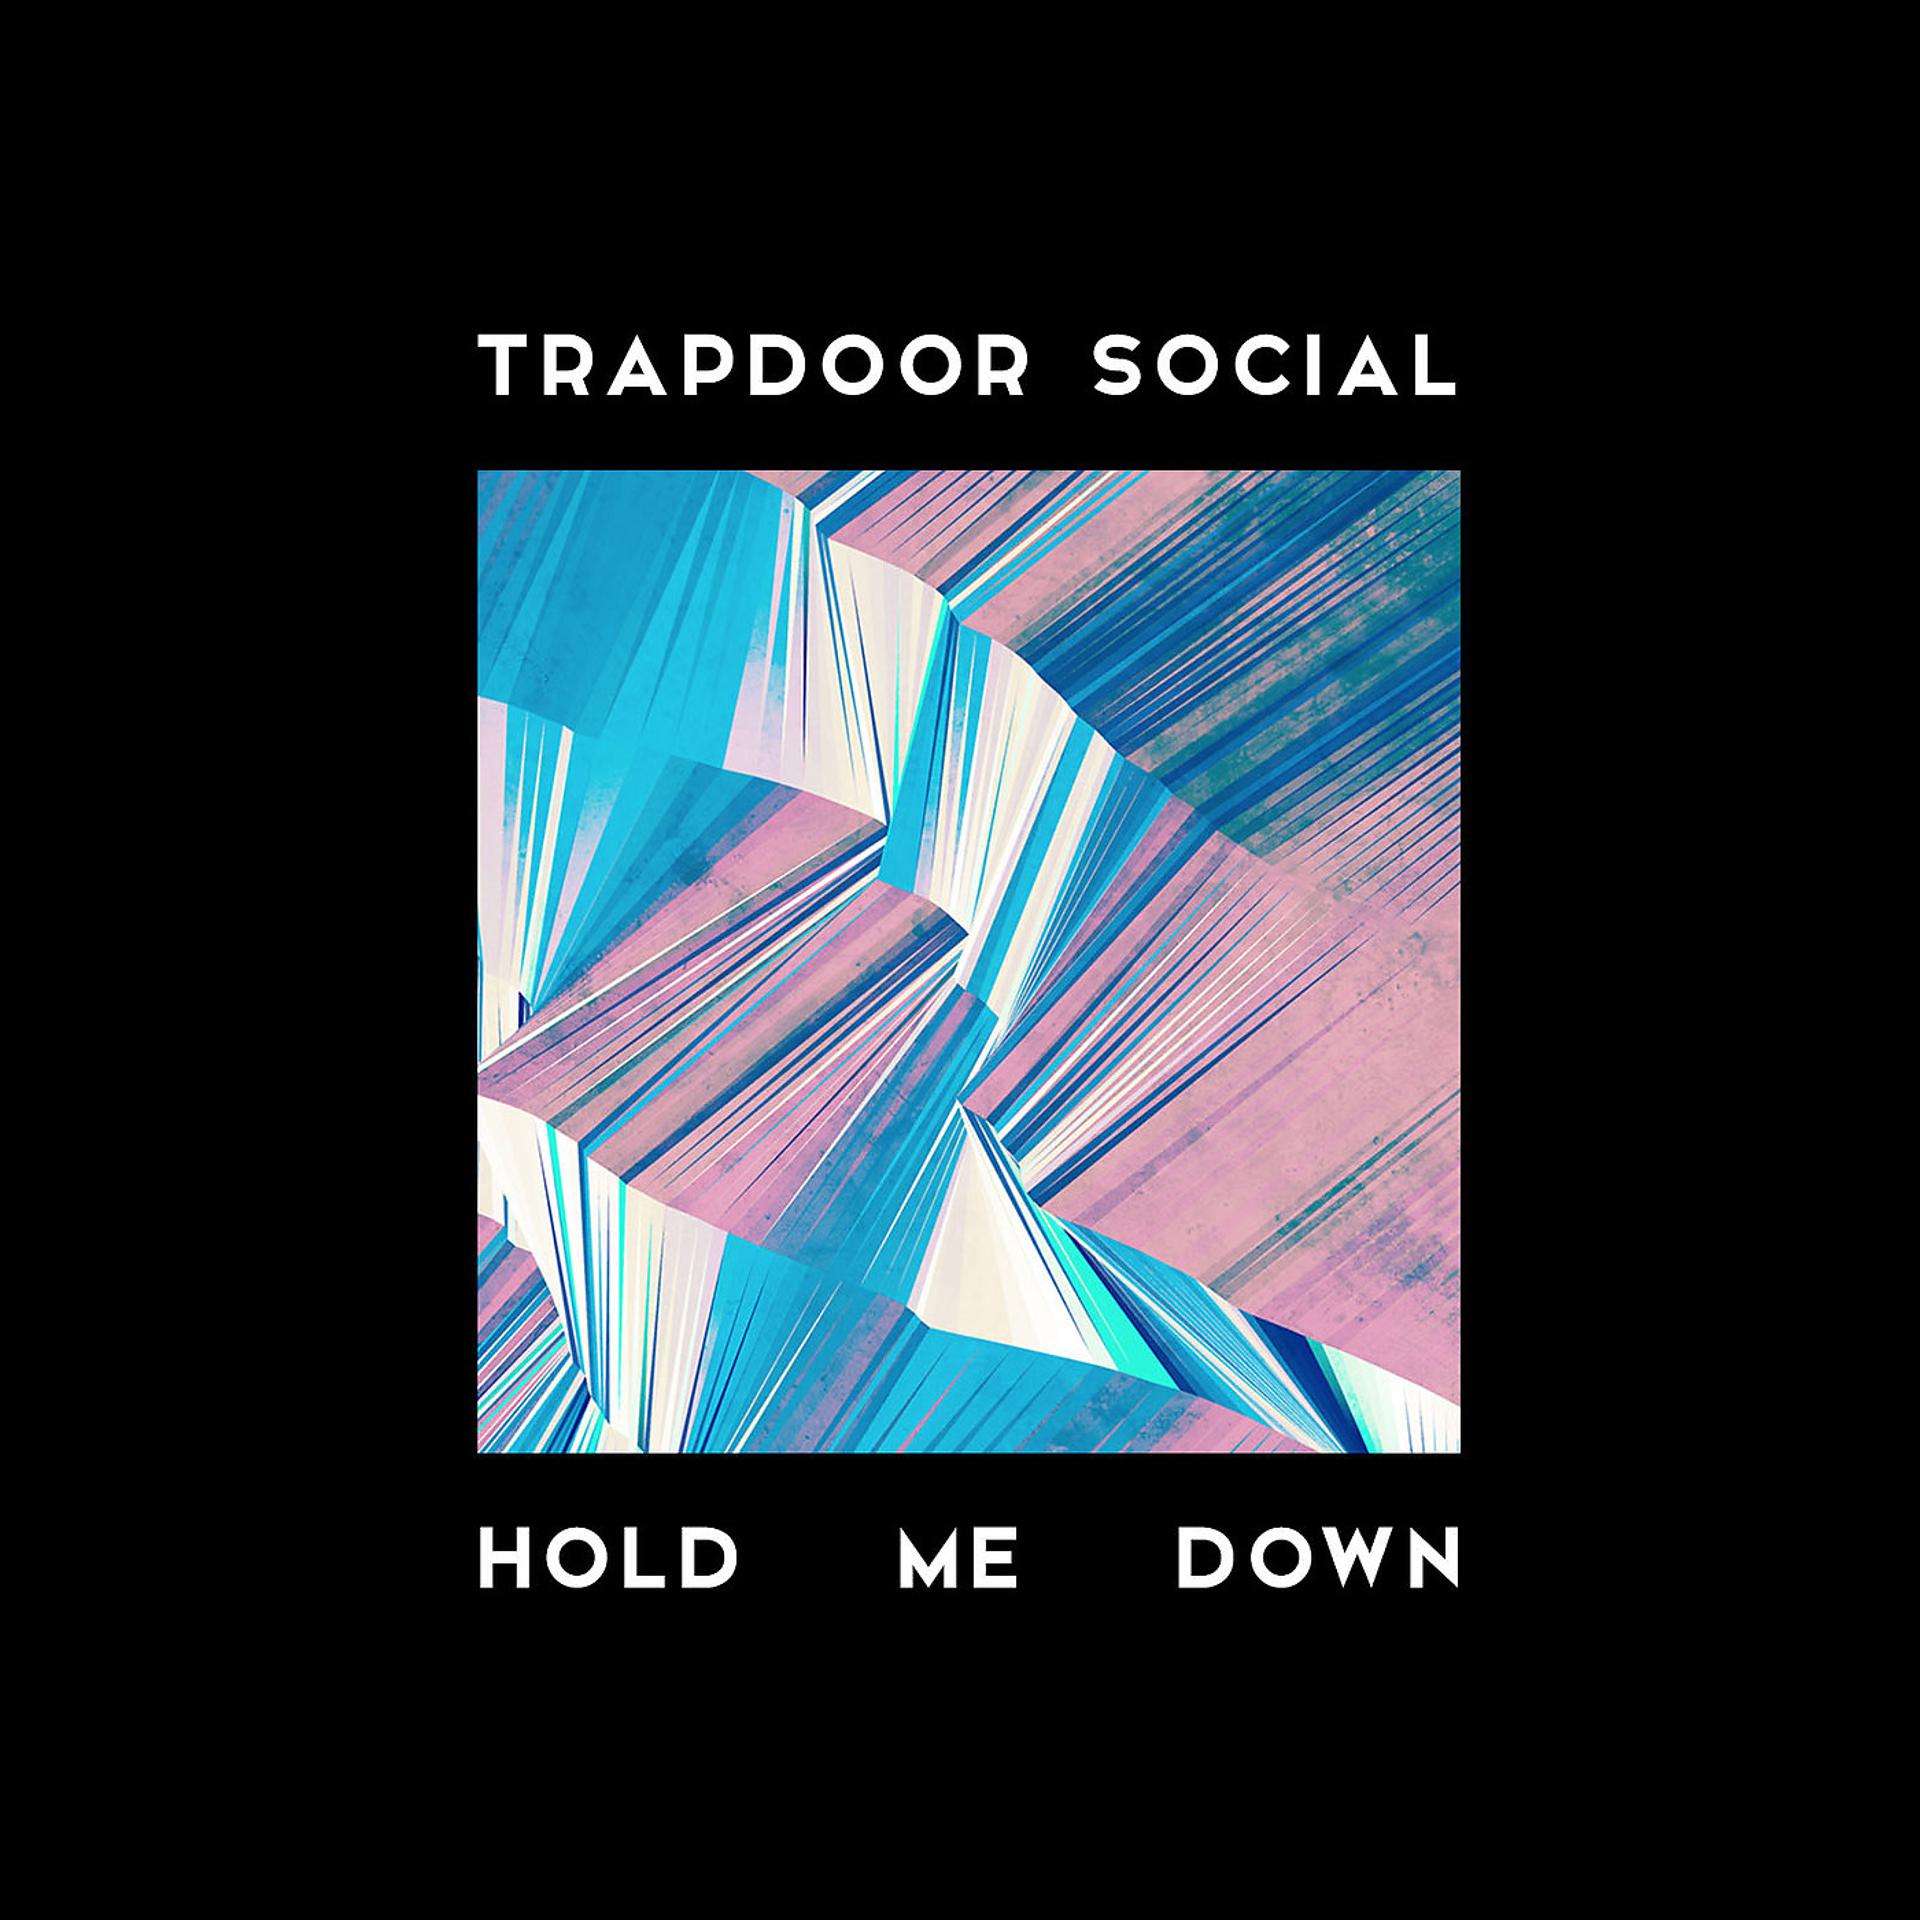 Something hold on me. Holding me down. Trapdoor social Moonlit Hearts.